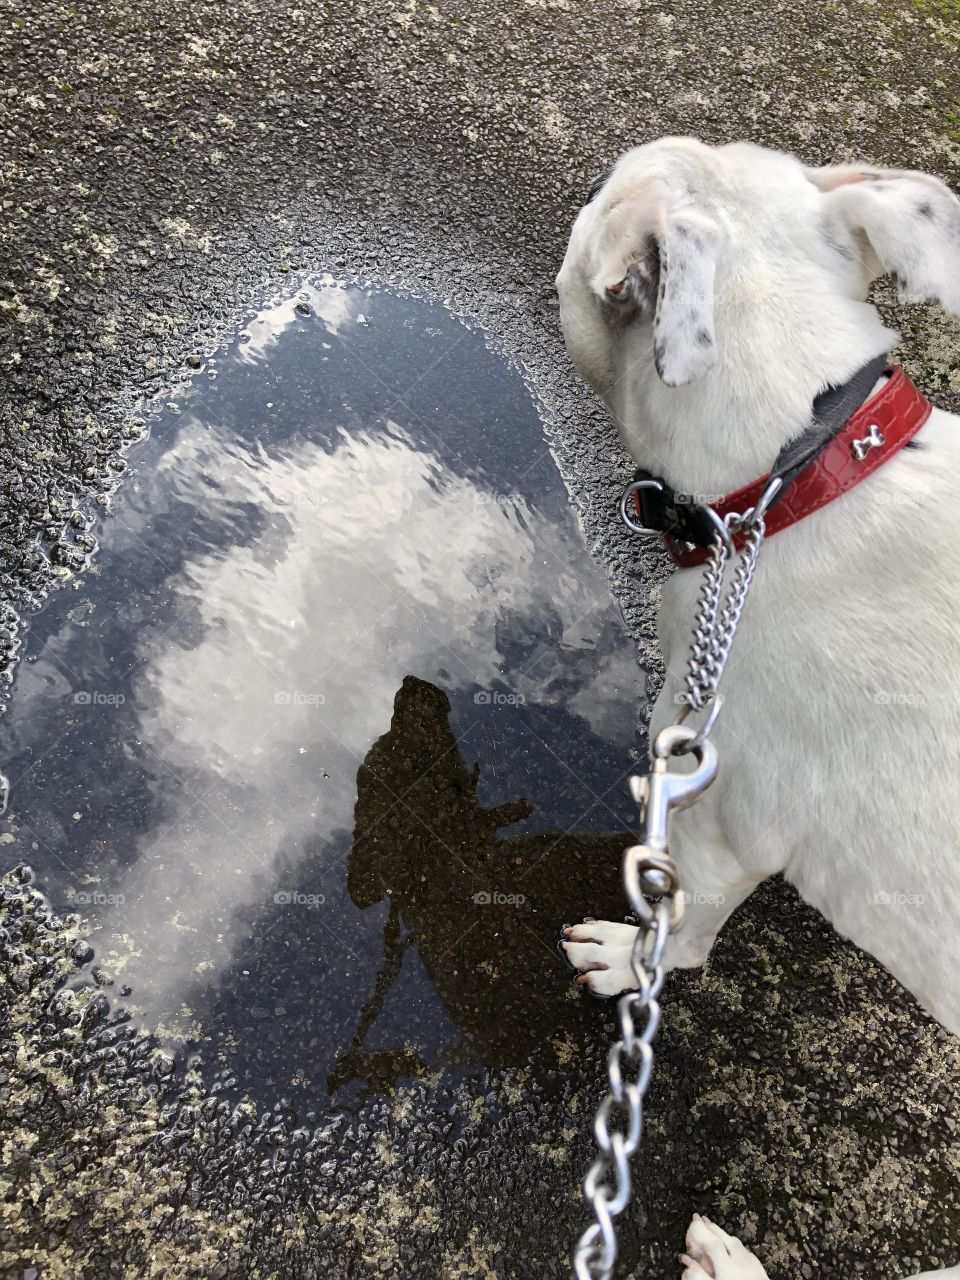 Autumn ‘ reflecting the sky and dog in the rain puddle 